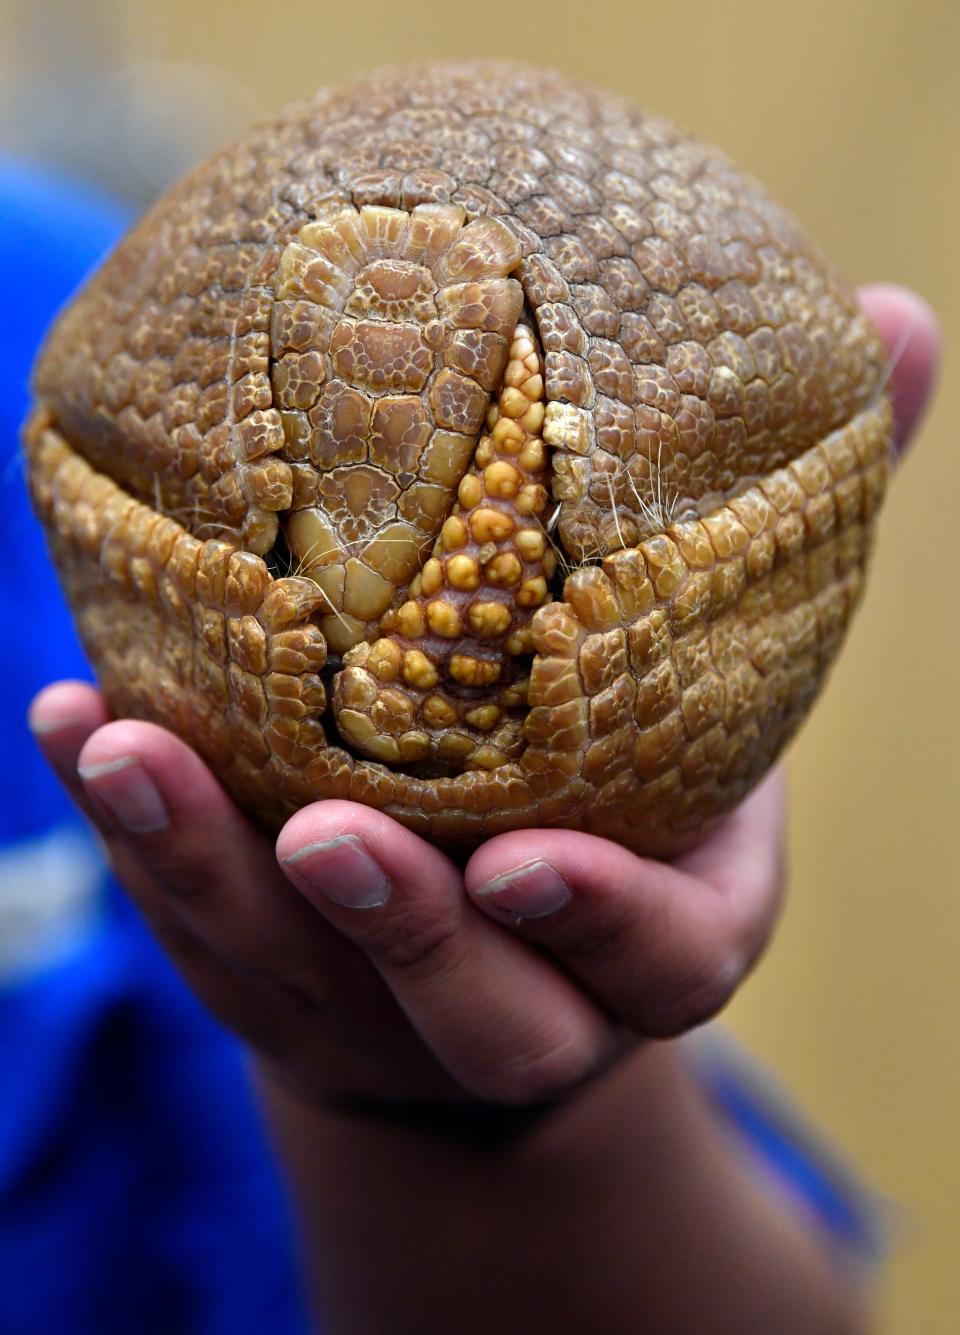 Clay Carabajal hold a three-banded armadillo named Emmy from the Abilene Zoo booth during Wednesday's Business Expo The zoo brought a selection of animals to the event, including a snake and baby owl. Native to Brazil, the top of Emmy's head can be seen nestled next to her tail. Hers is the only armadillo species that can roll into a complete ball.